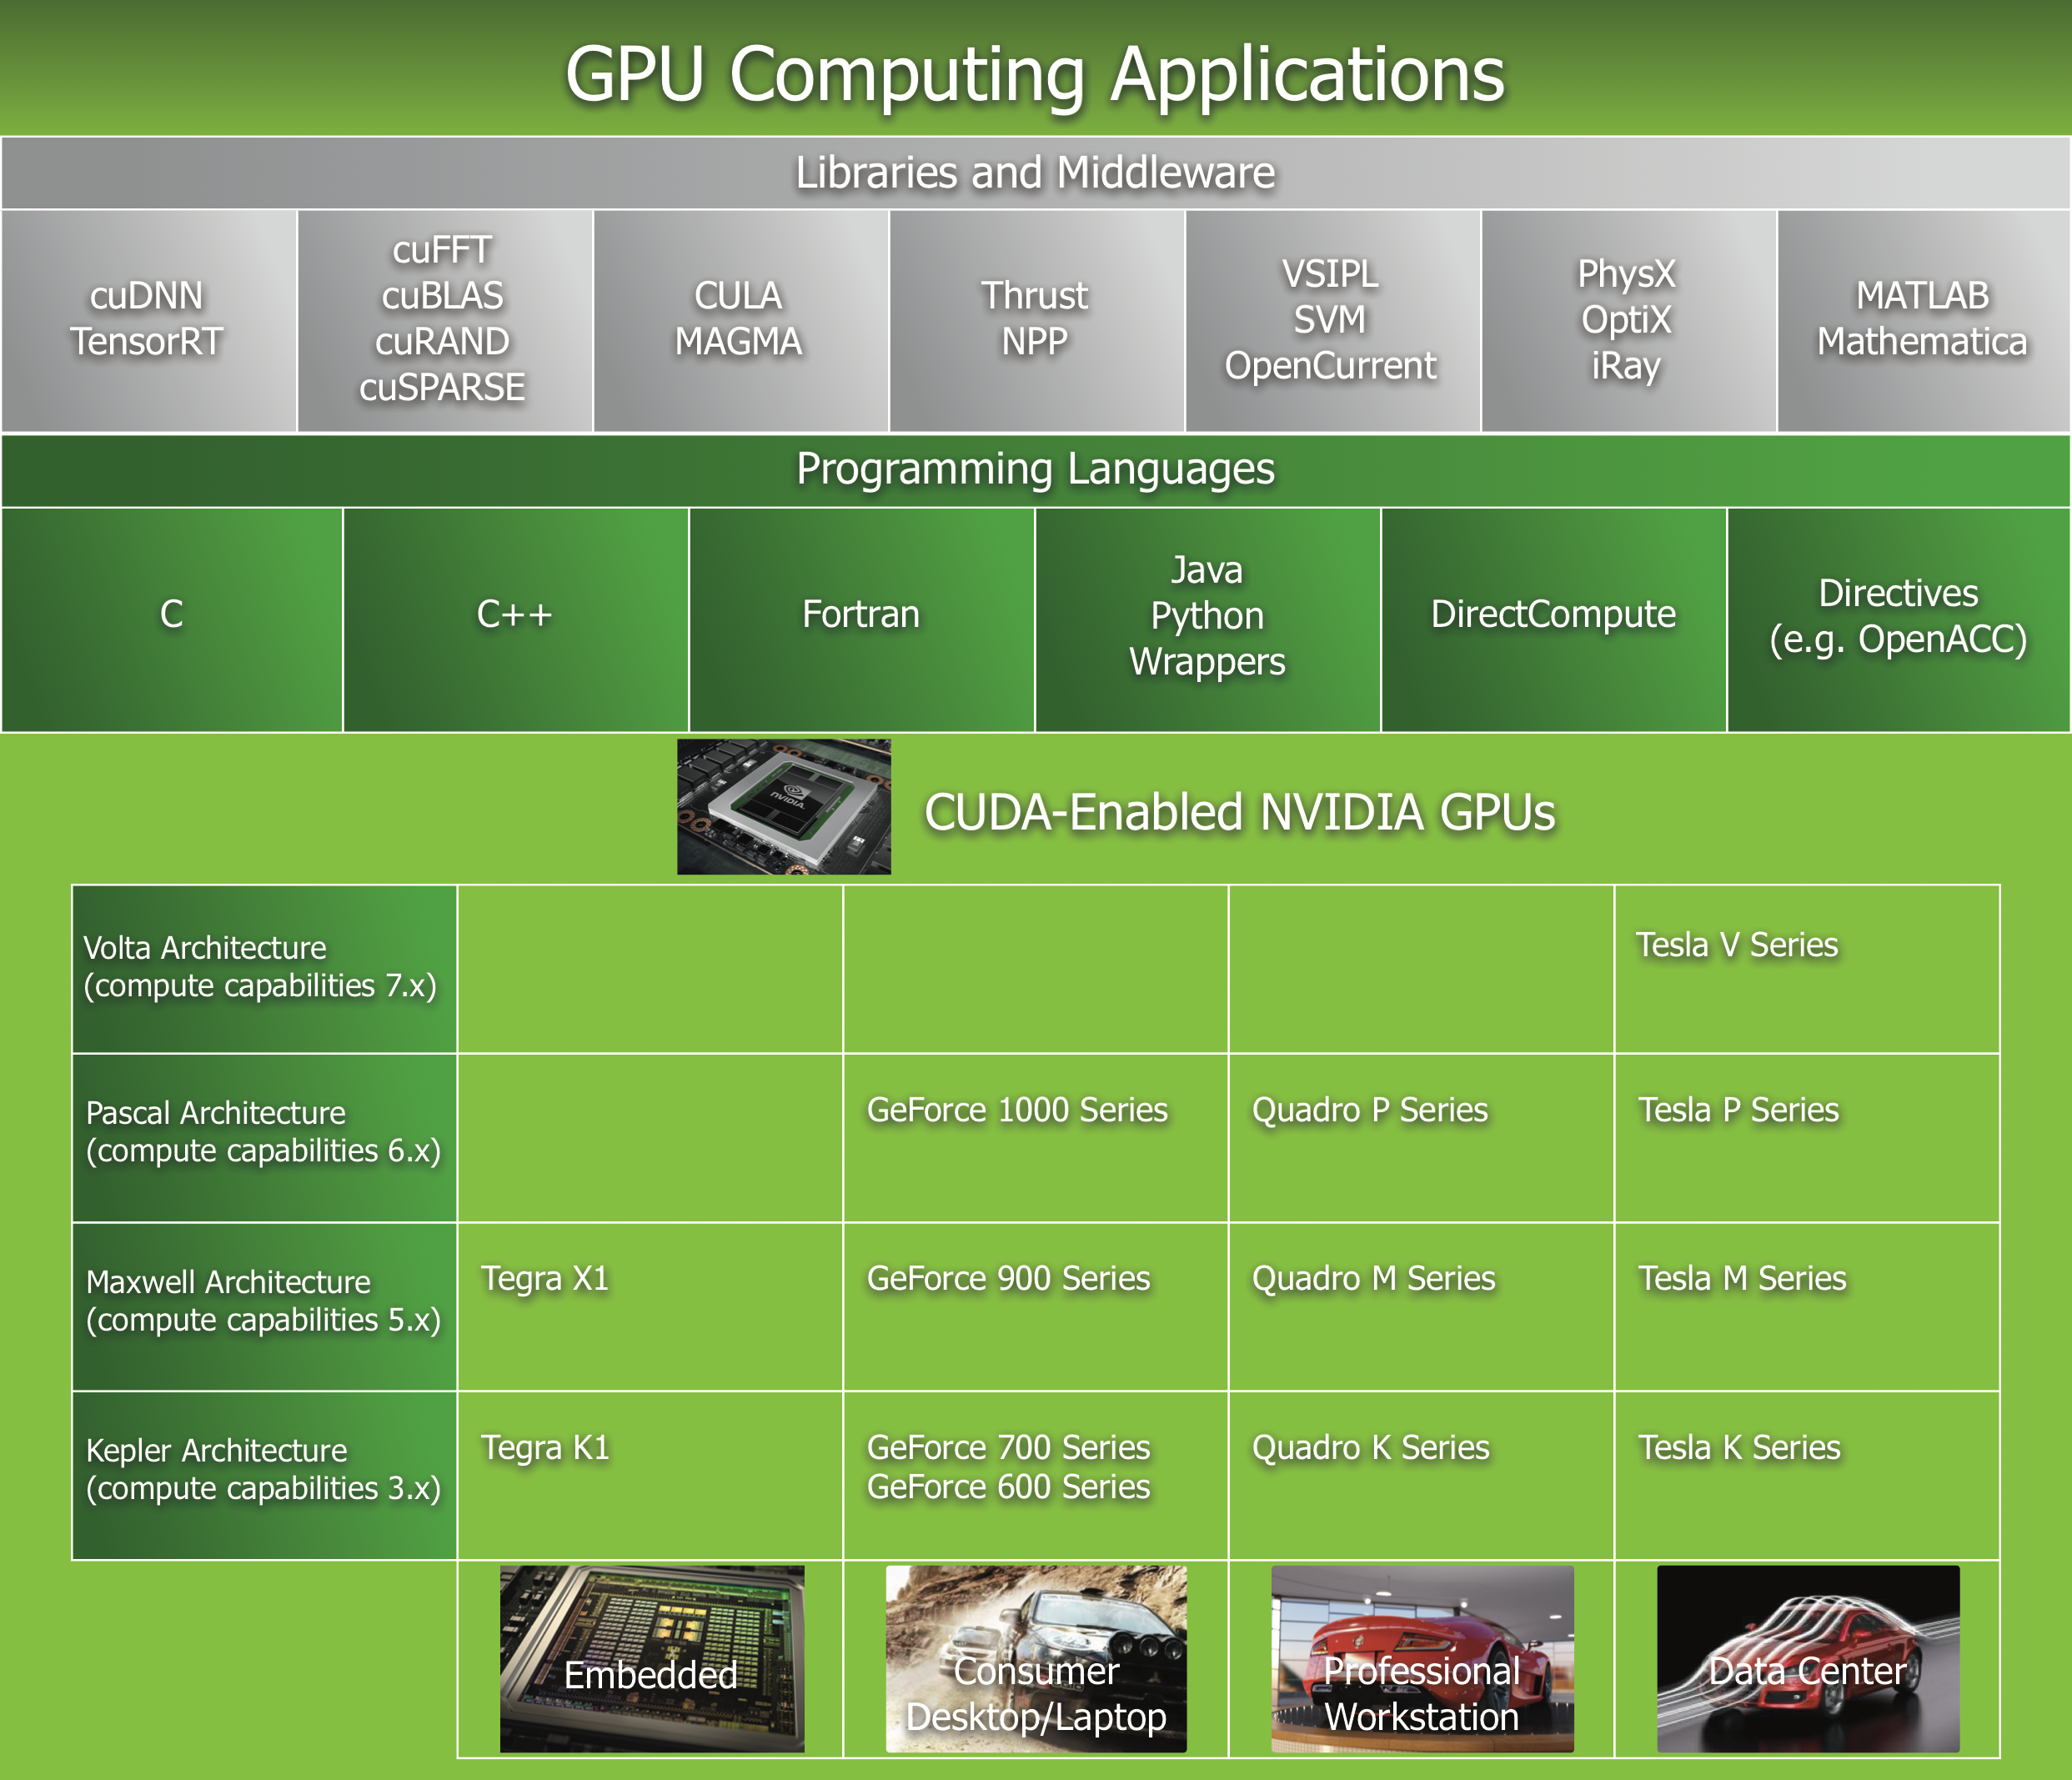 CUDA is designed to support         various languages and application programming interfaces.